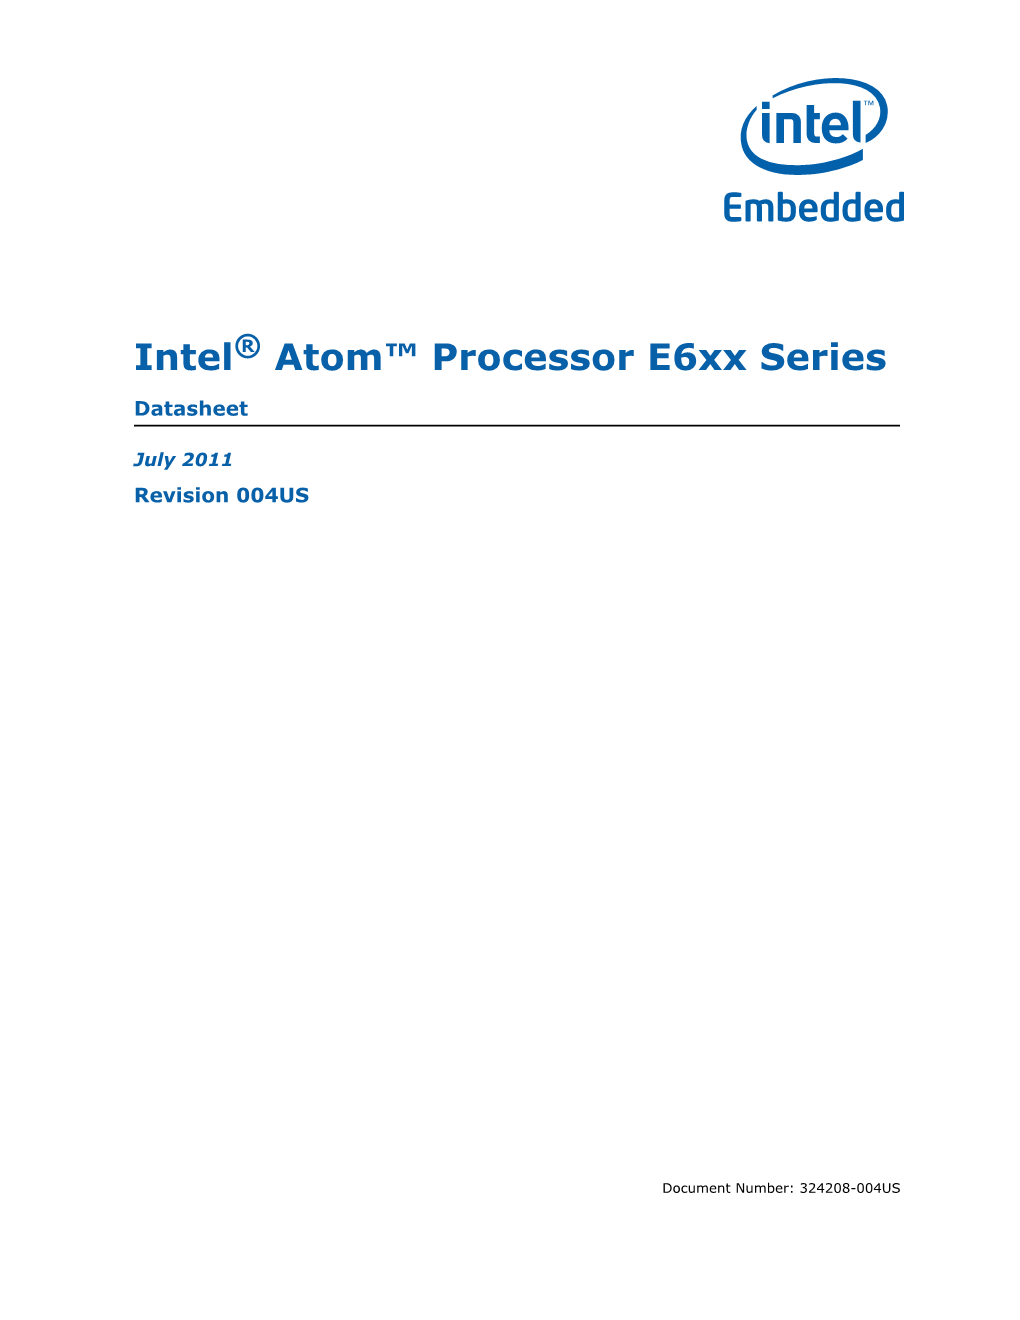 Intel ® Atom™ Processor E6xx Series SKU for Different Segments” on Page 30 Updated Table 15